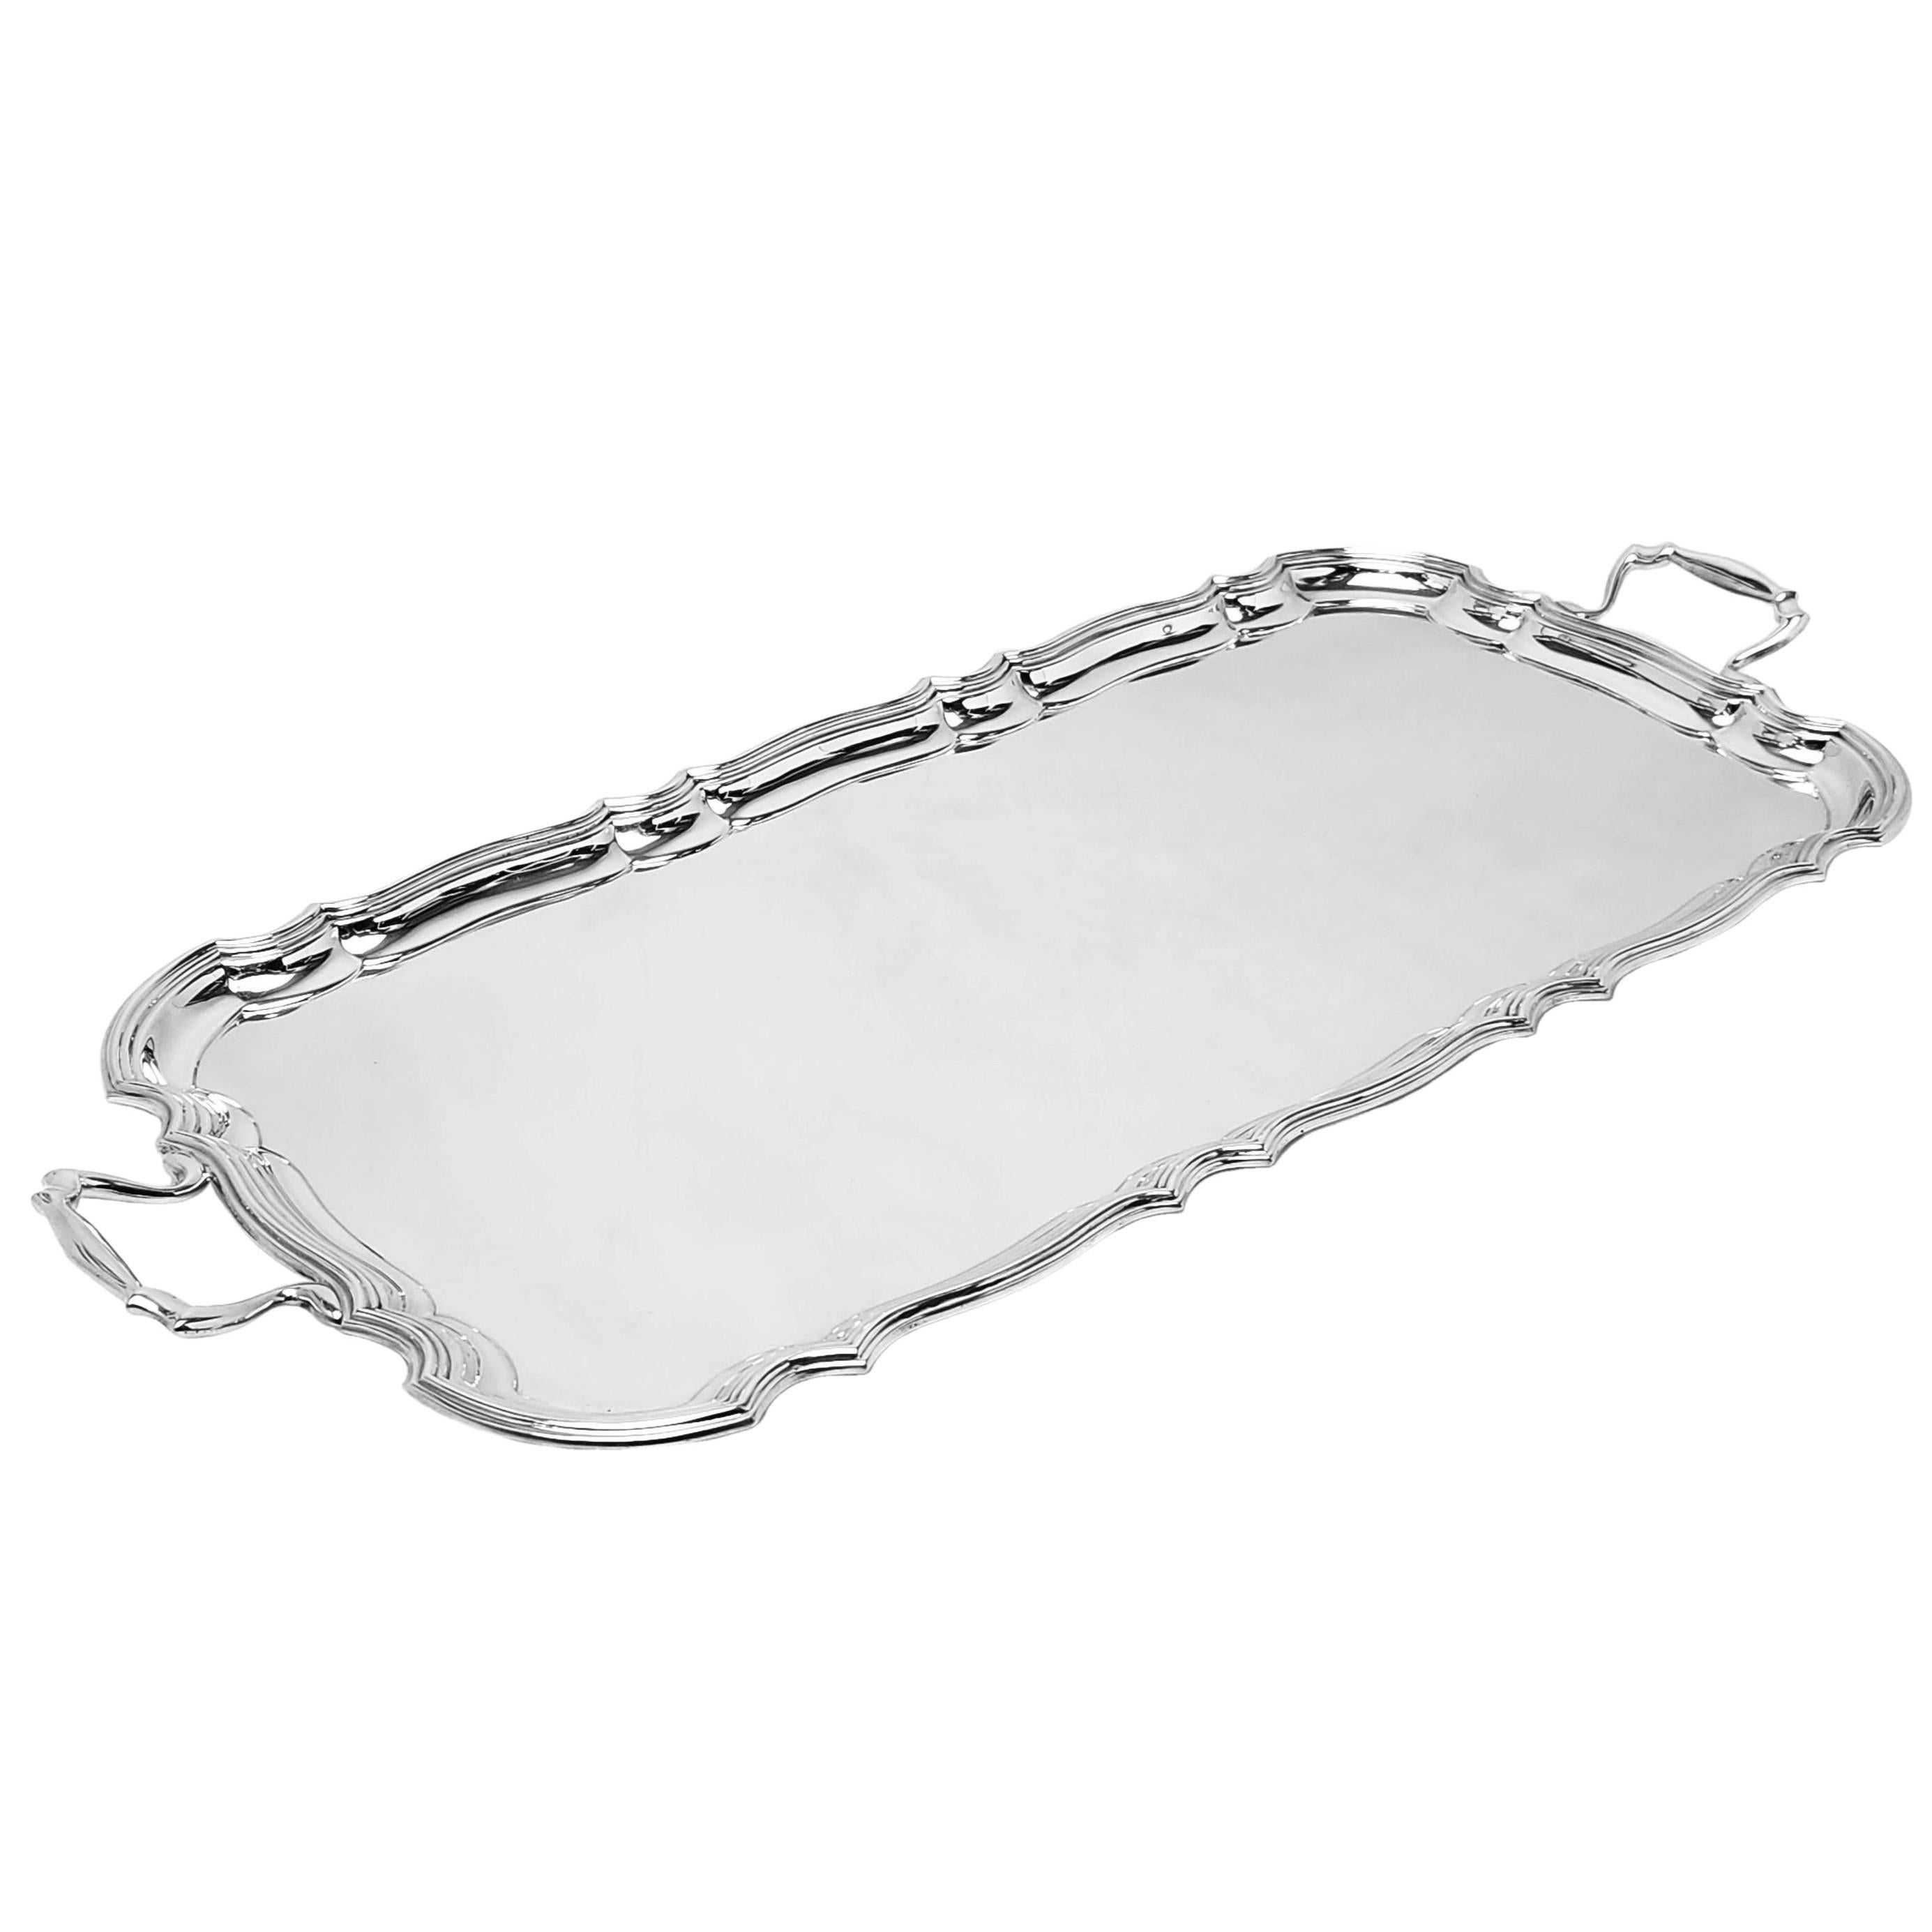 Antique Sterling Silver Tray 1915 Sandwich Serving Platter In Good Condition For Sale In London, GB